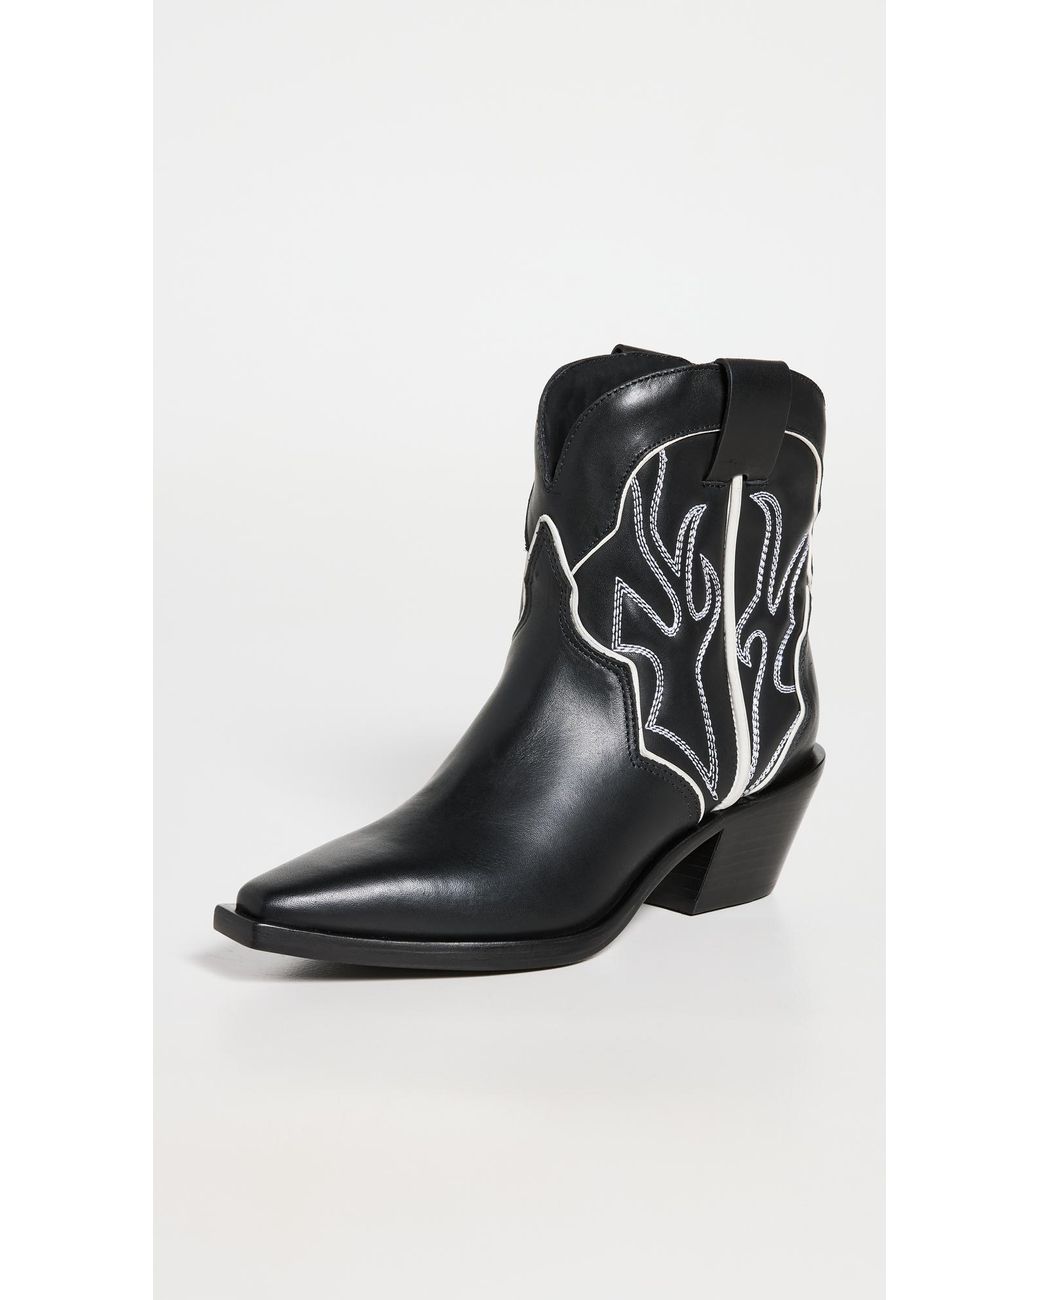 Reformation Otto Western Boots in Black | Lyst